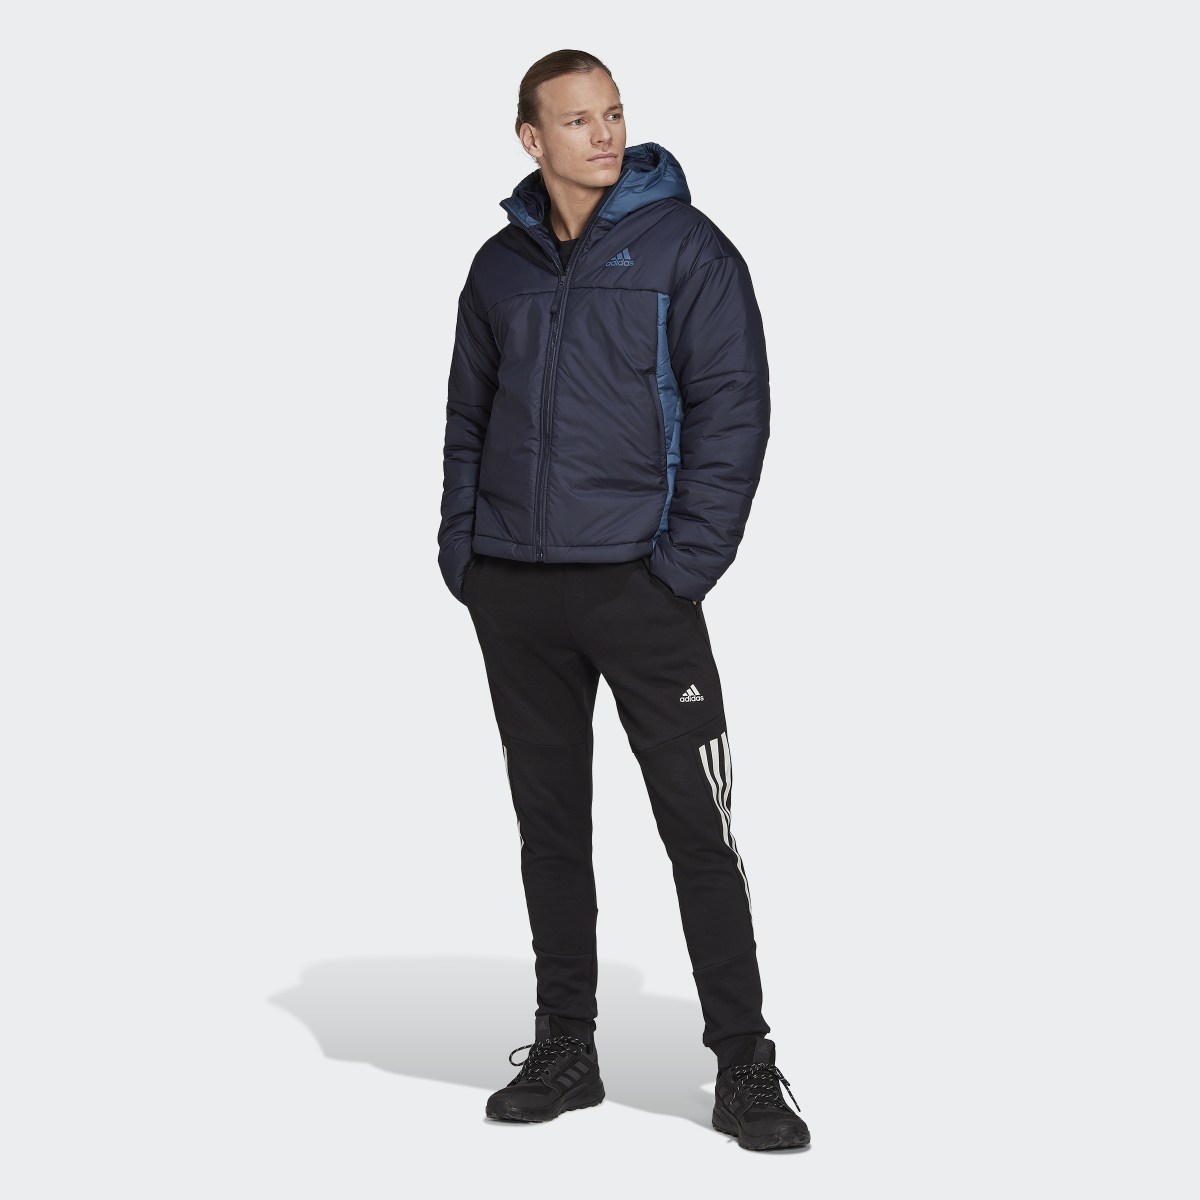 Adidas BSC 3-Stripes Puffy Hooded Jacket. 7